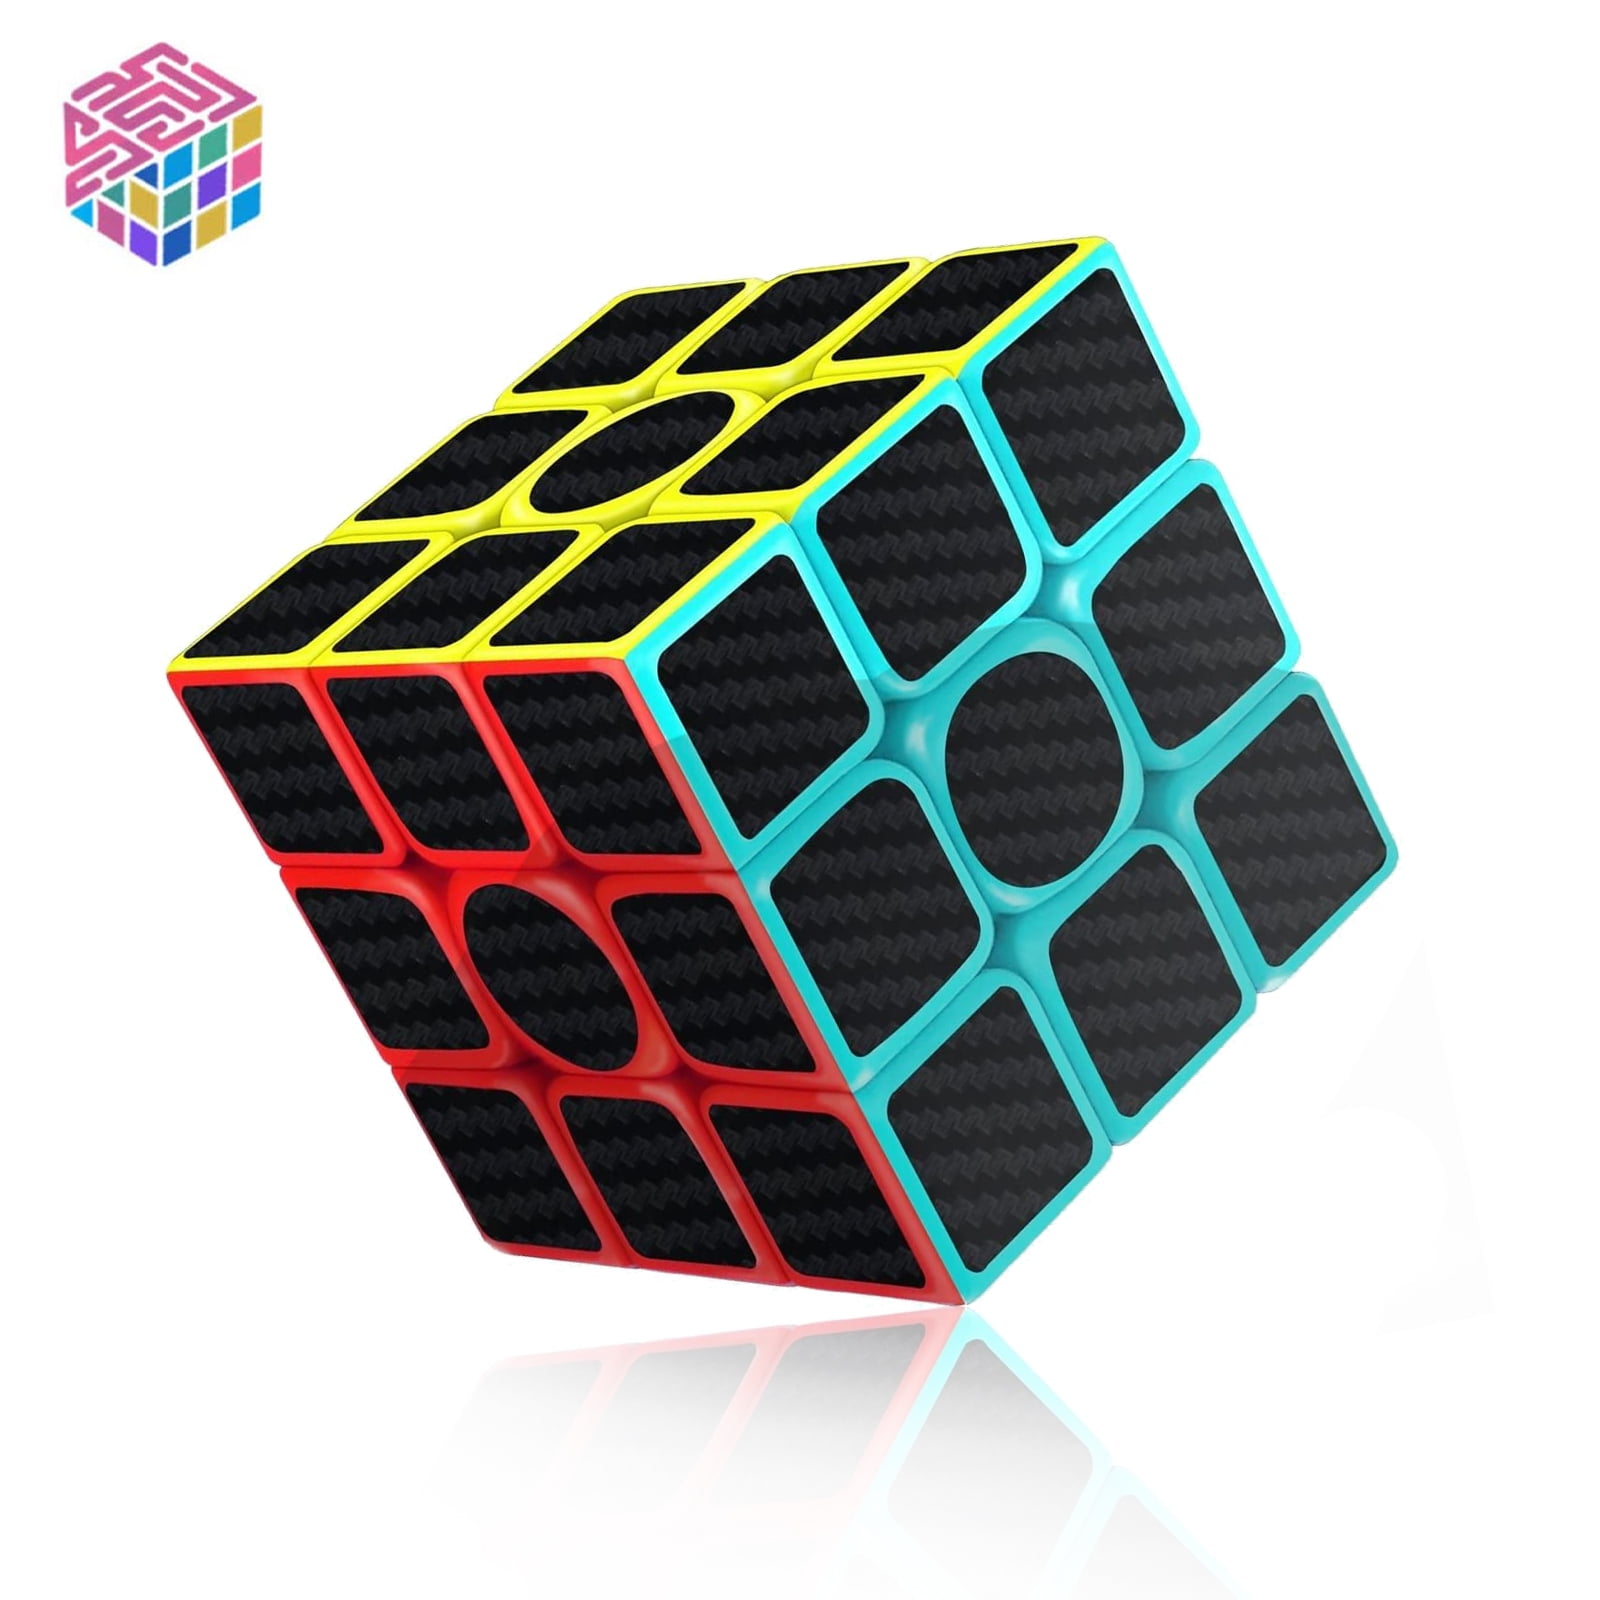 Magic Cube 3x3x3 High Quality Speed Colorful Puzzle Cube Puzzle Toys Cub  Stock